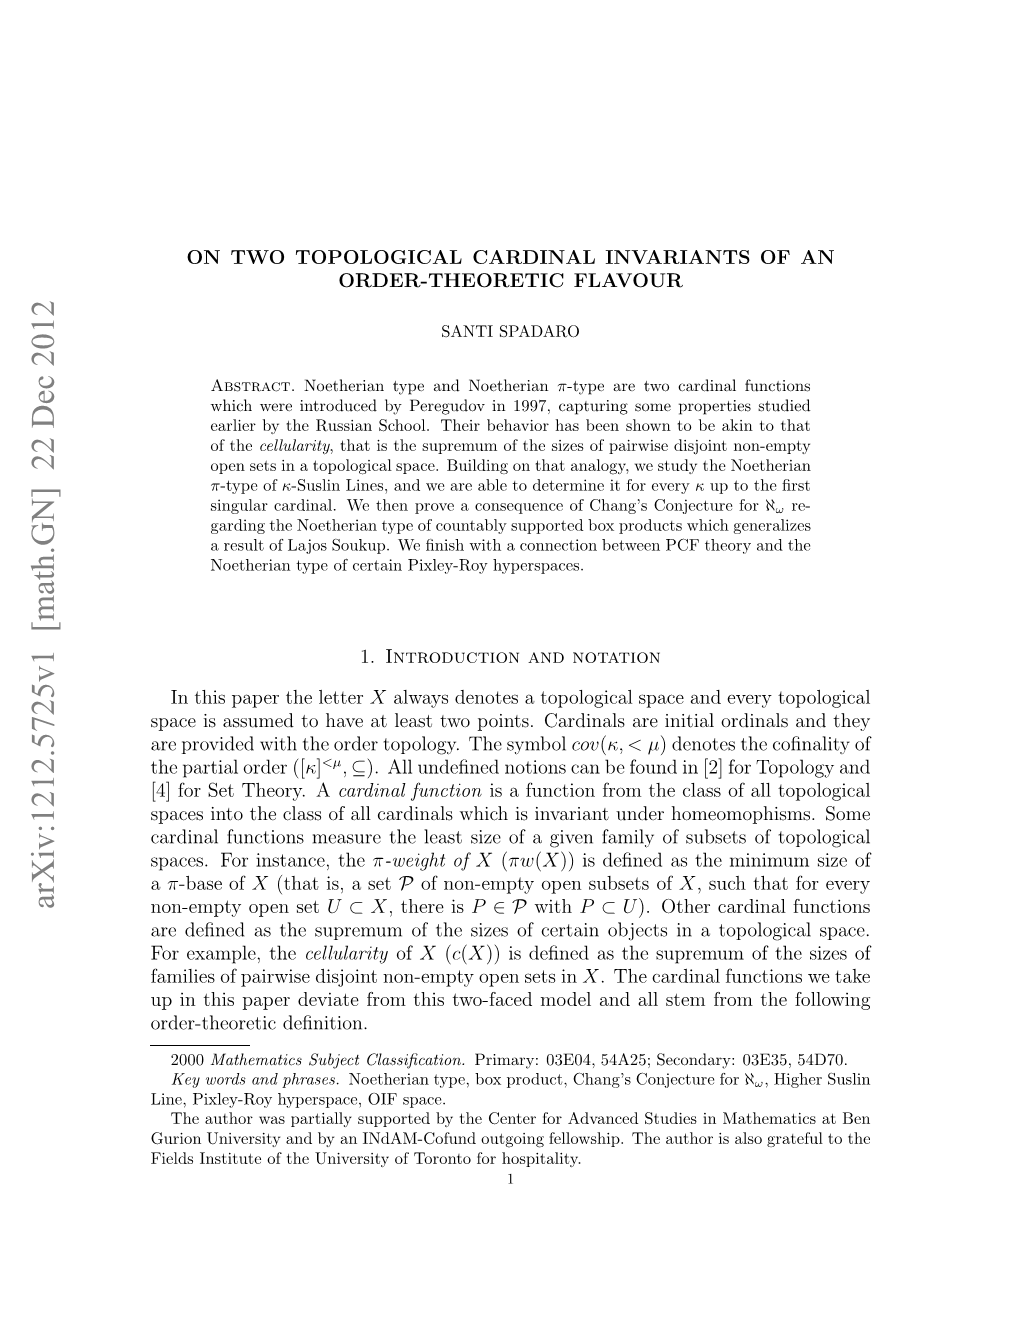 On Two Topological Cardinal Invariants of an Order-Theoretic Flavour 3